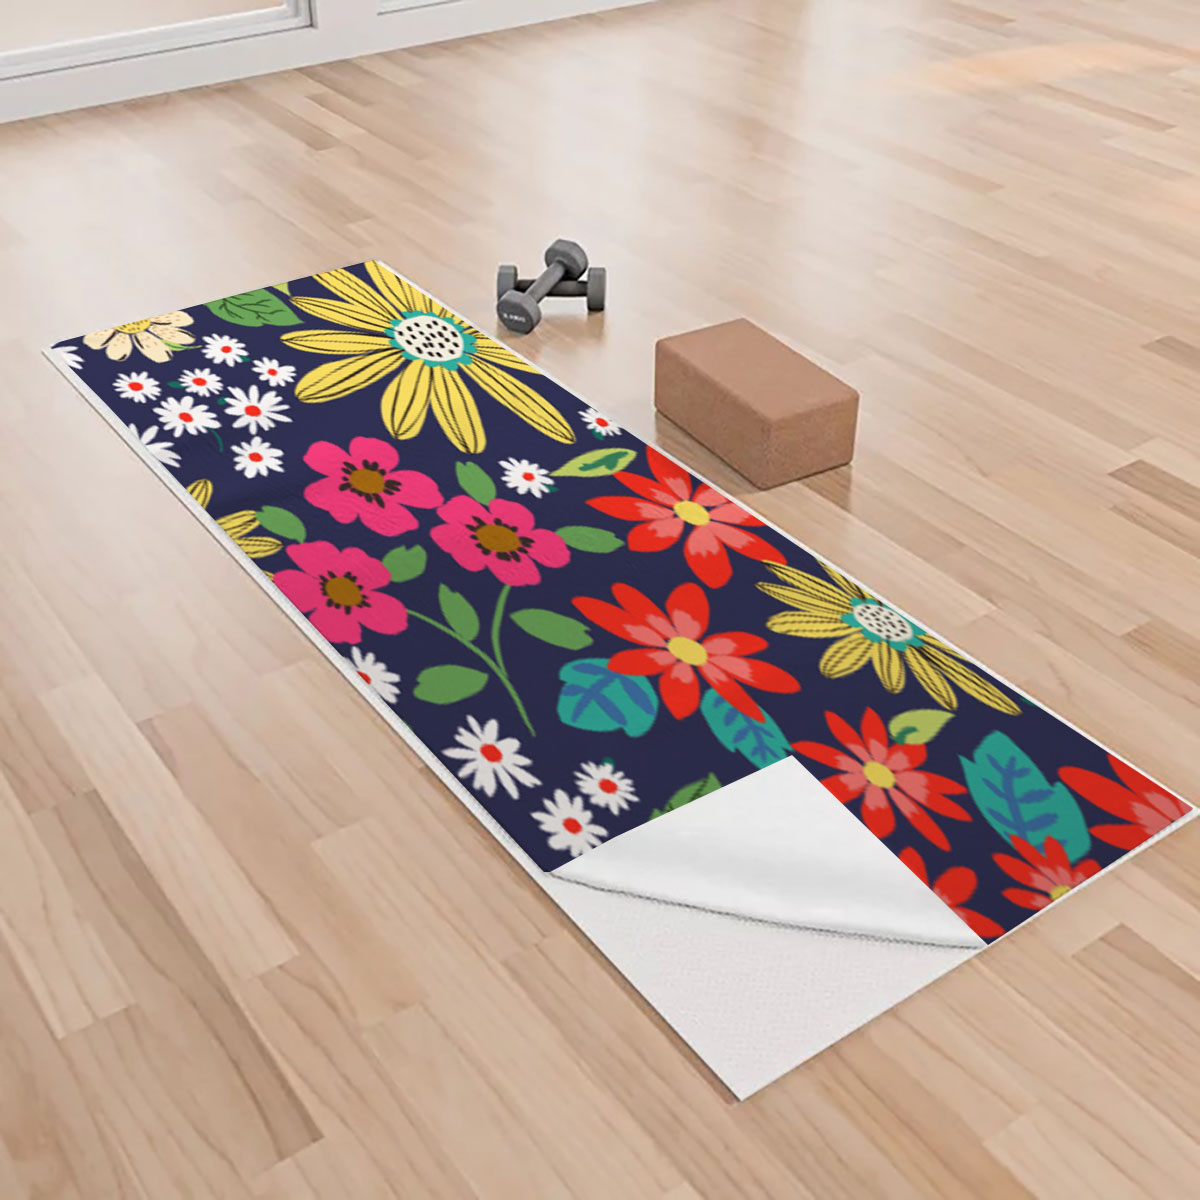 Colorful Daisy Yoga Towels